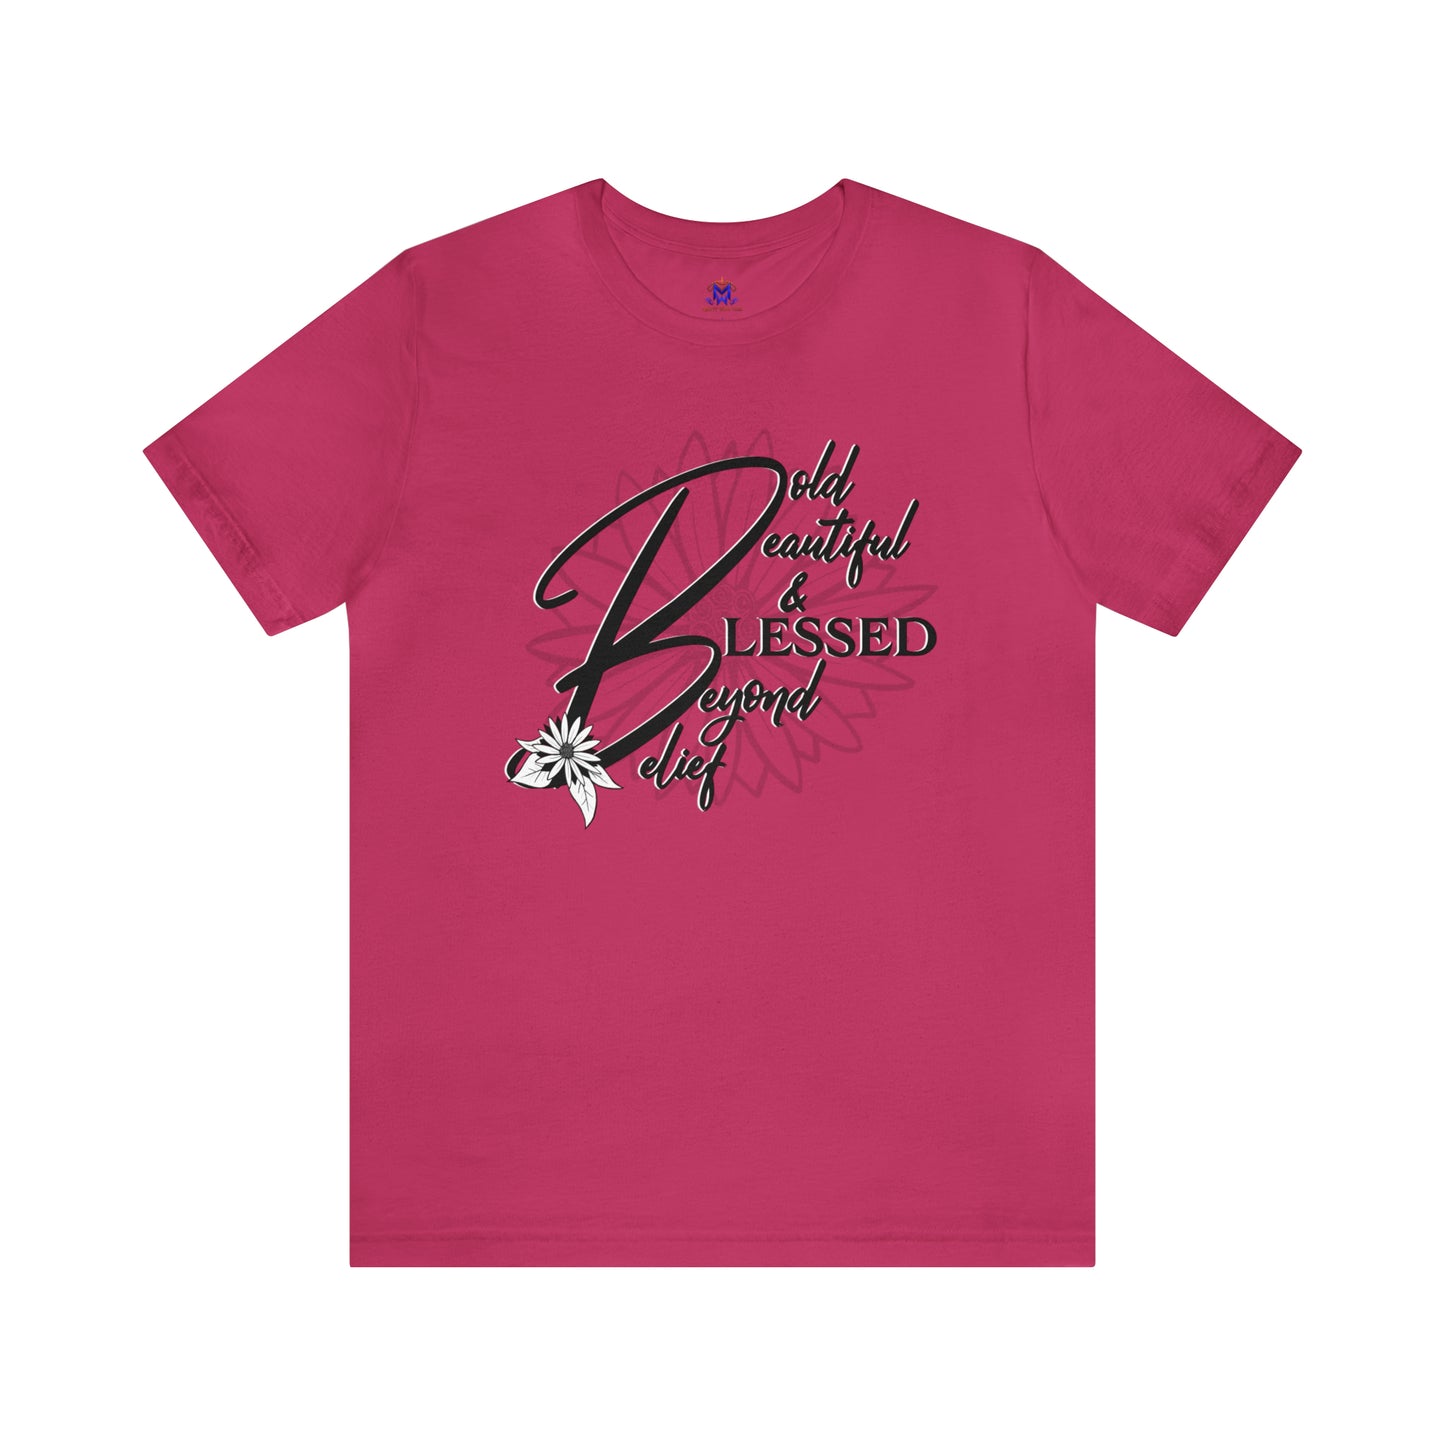 Bold Beautiful & Blessed Beyond Belief-(Available in more colors)